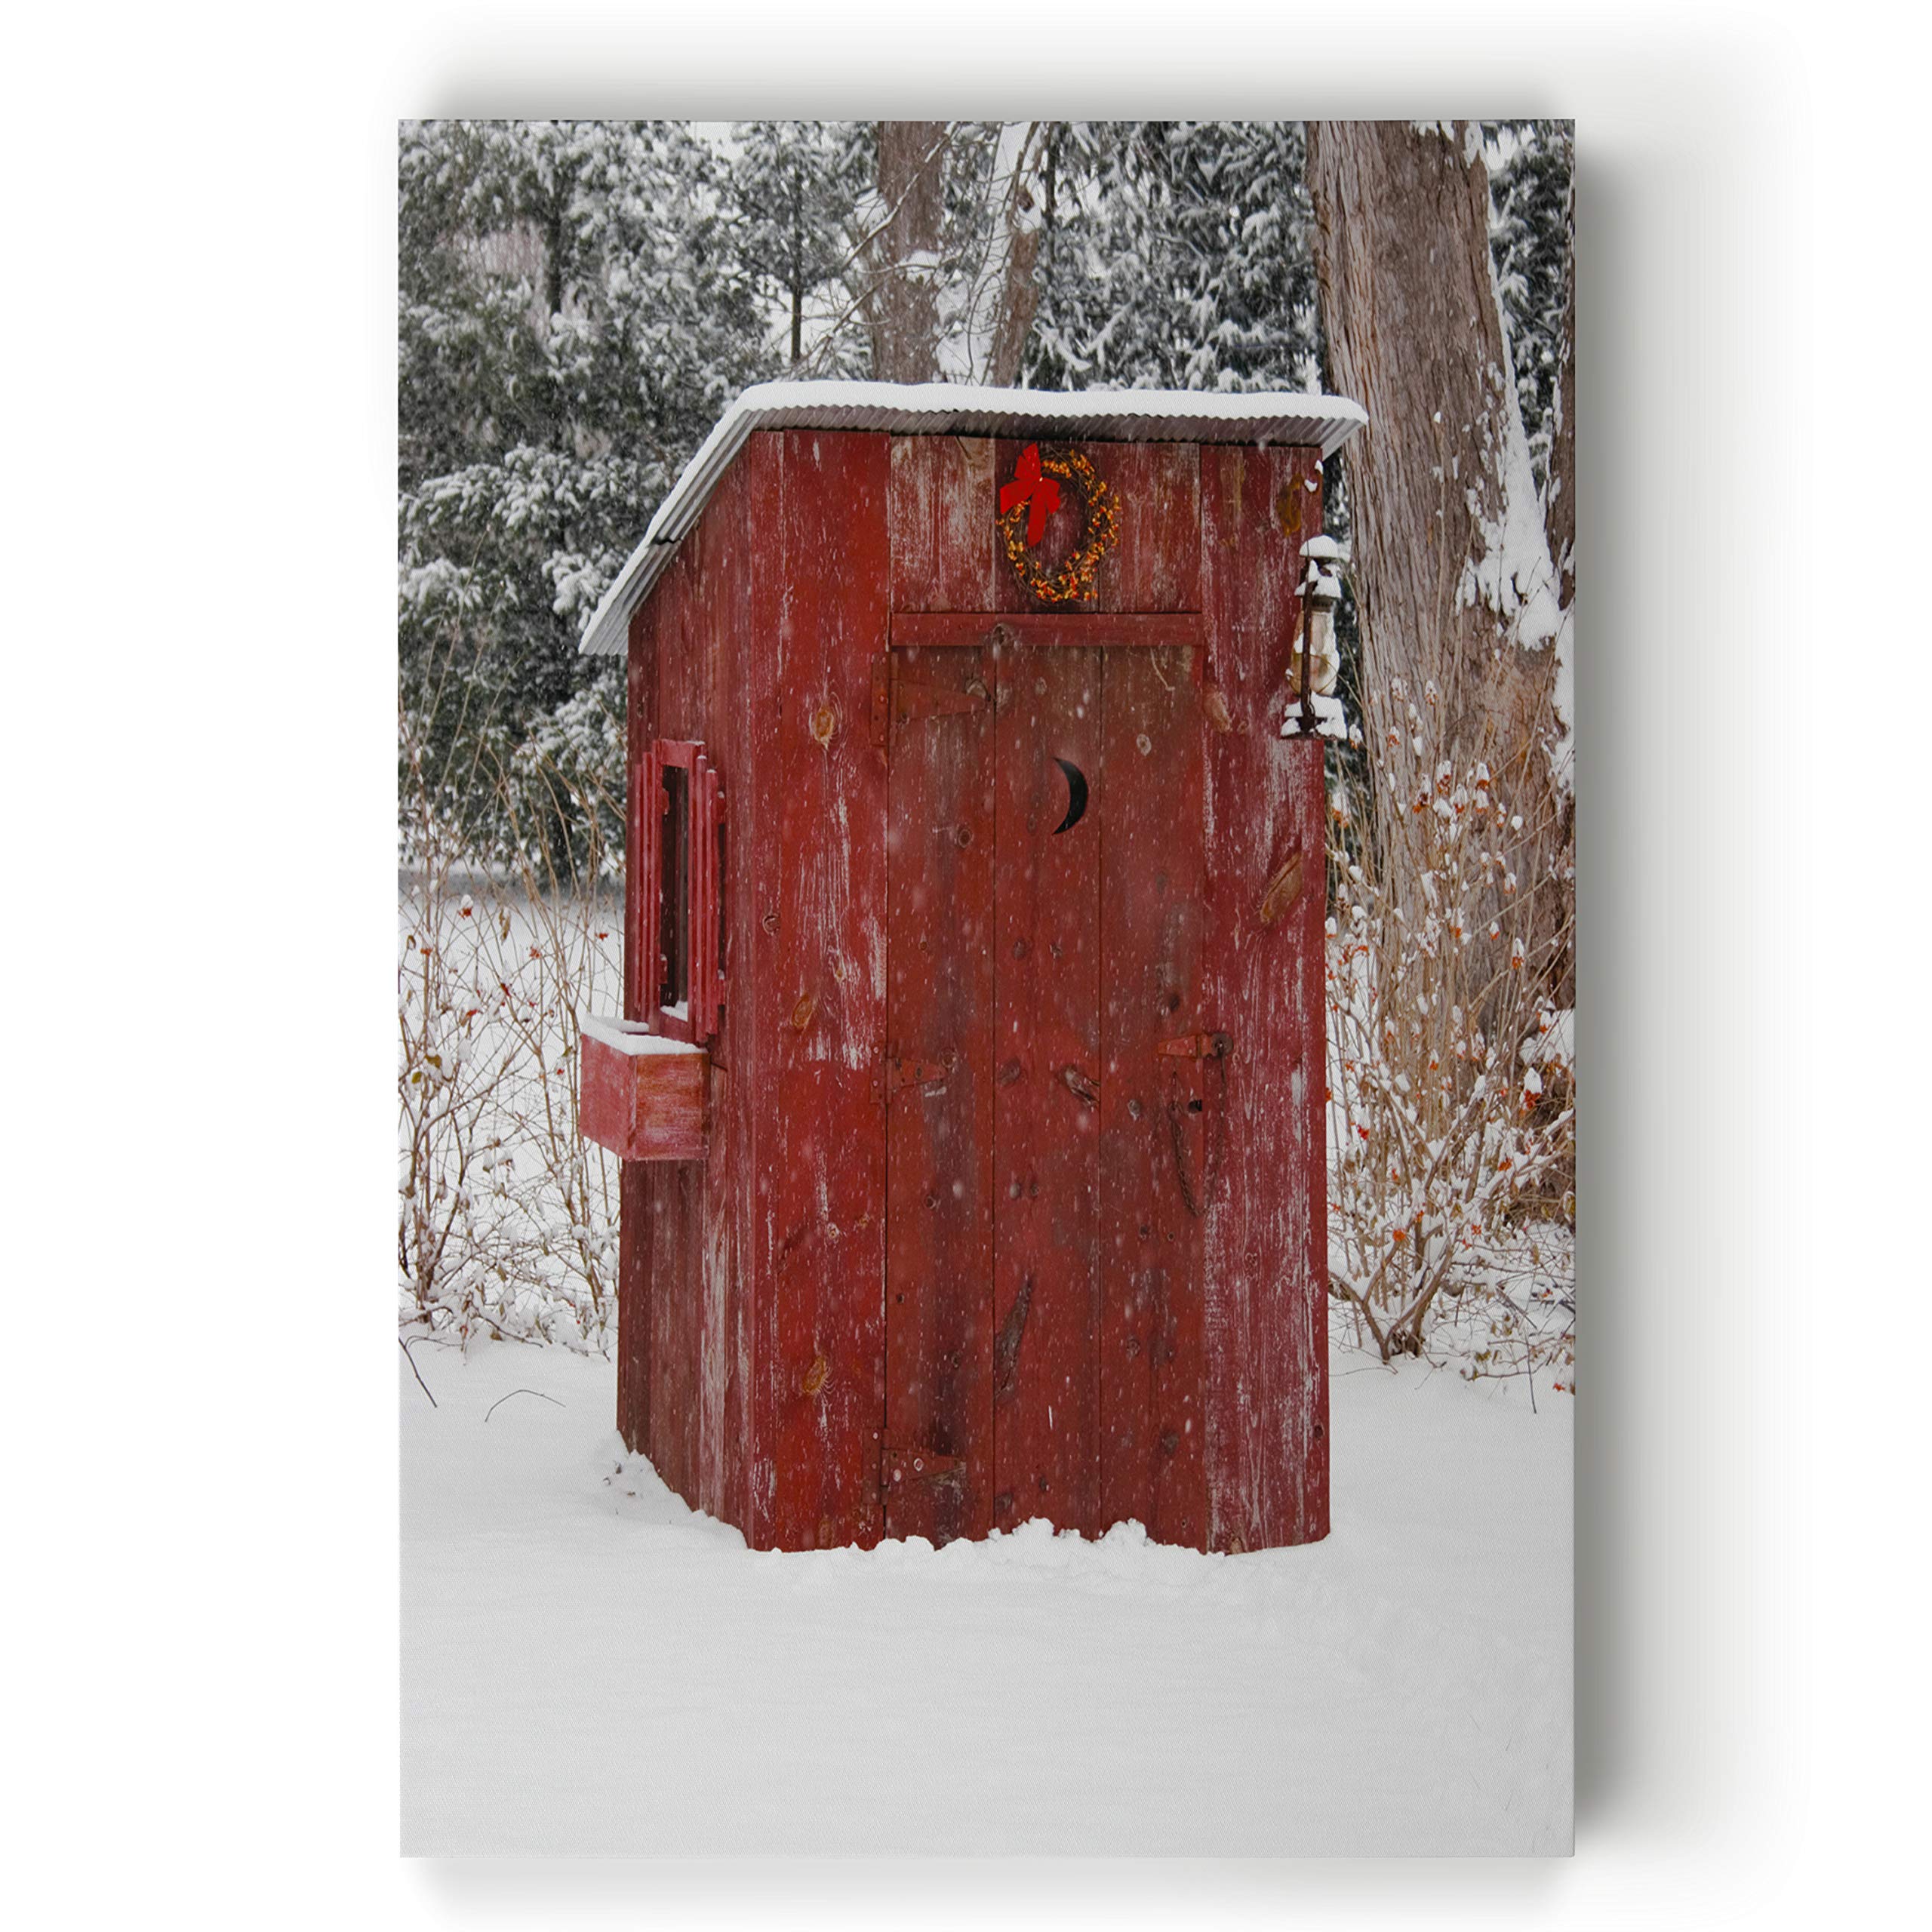 Renditions Gallery Xmas Canvas Prints For Home Decor Red Snowy Outhouse Christmas On The Farm Wall Hanging Picture  Prints For